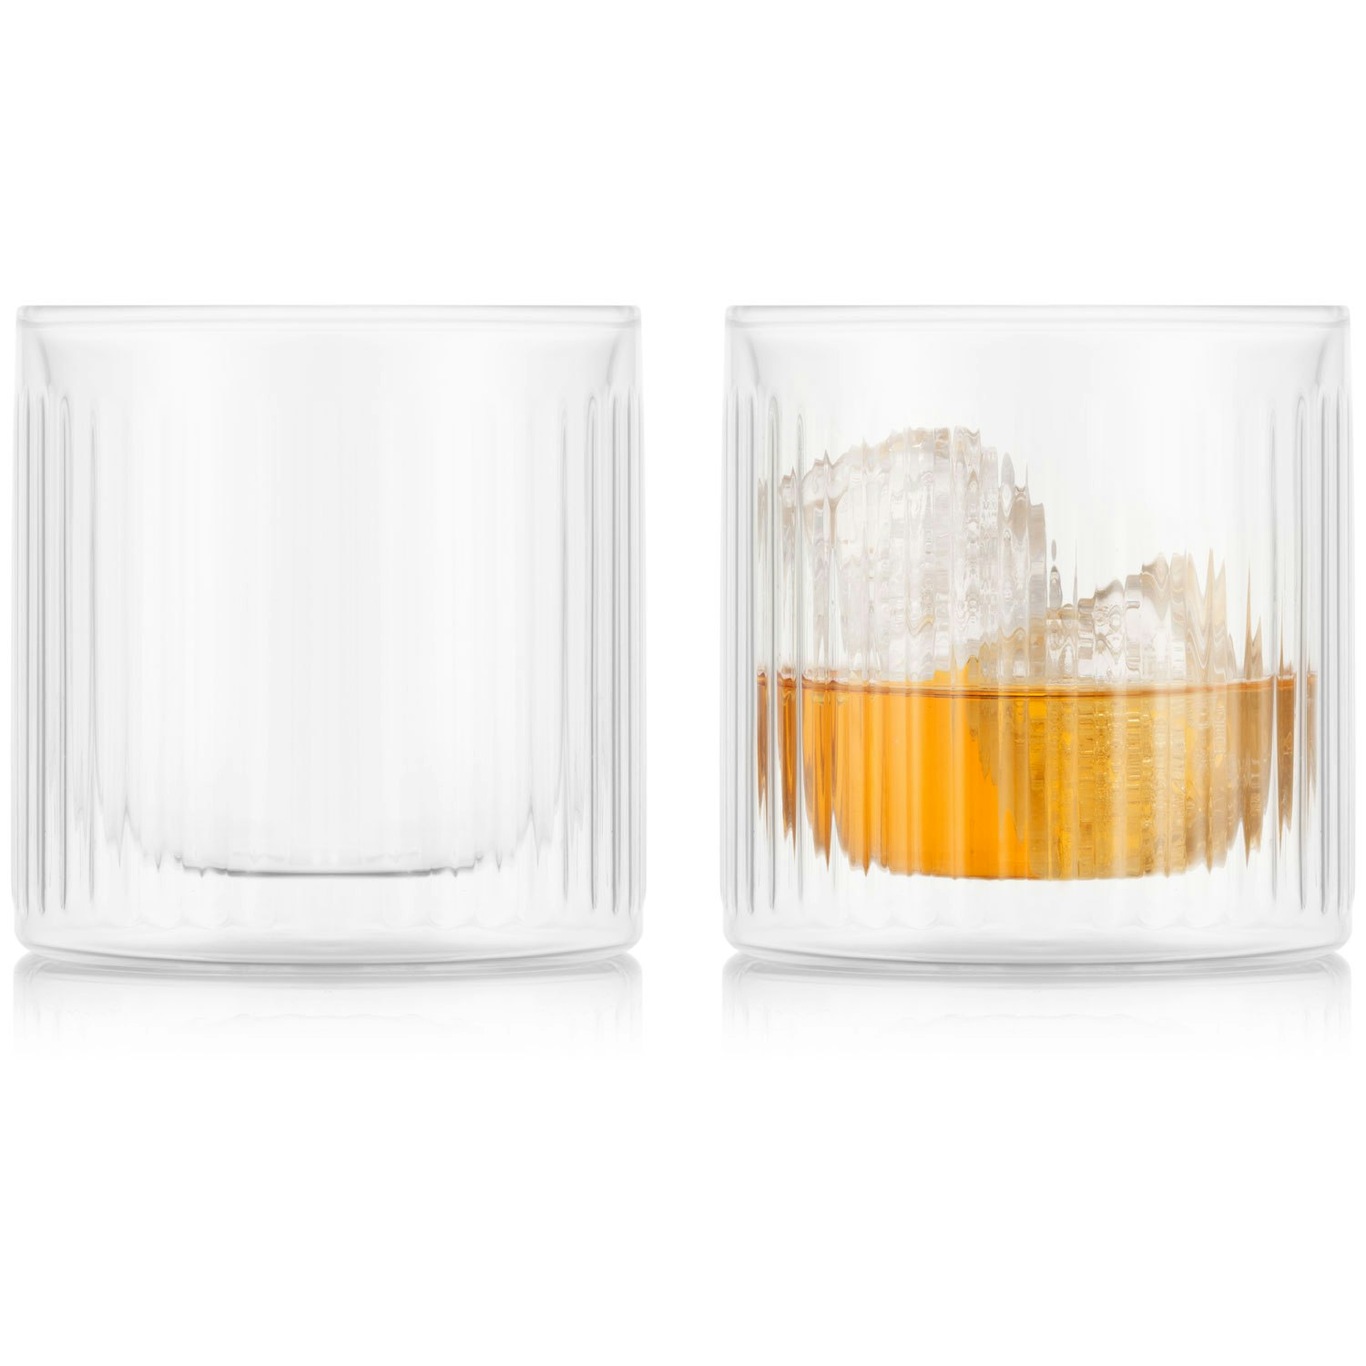 https://royaldesign.com/image/2/bodum-douro-double-walled-whiskey-glasses-2-pack-30-cl-0?w=800&quality=80